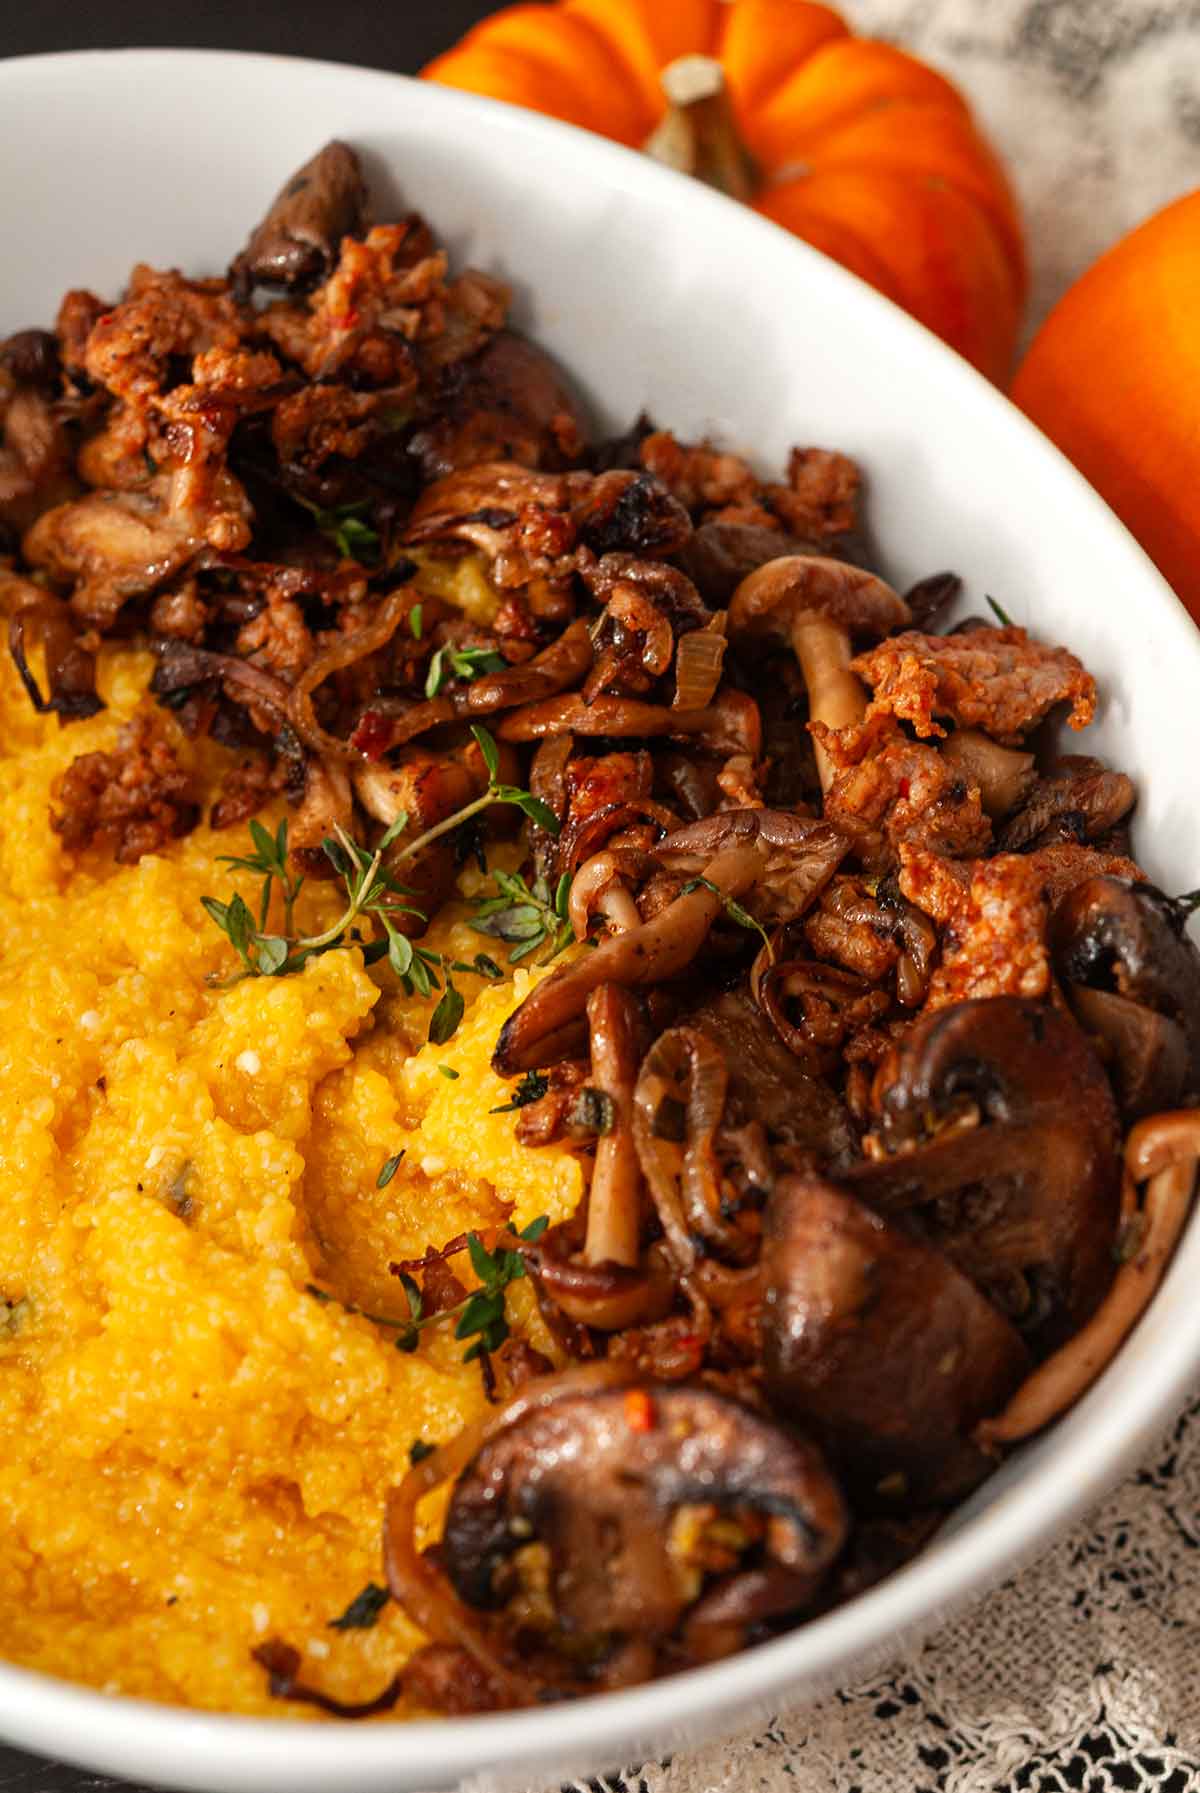 The mushrooms in a bowl of pumpkin polenta and mushrooms in front of 2 pumpkin gourds.